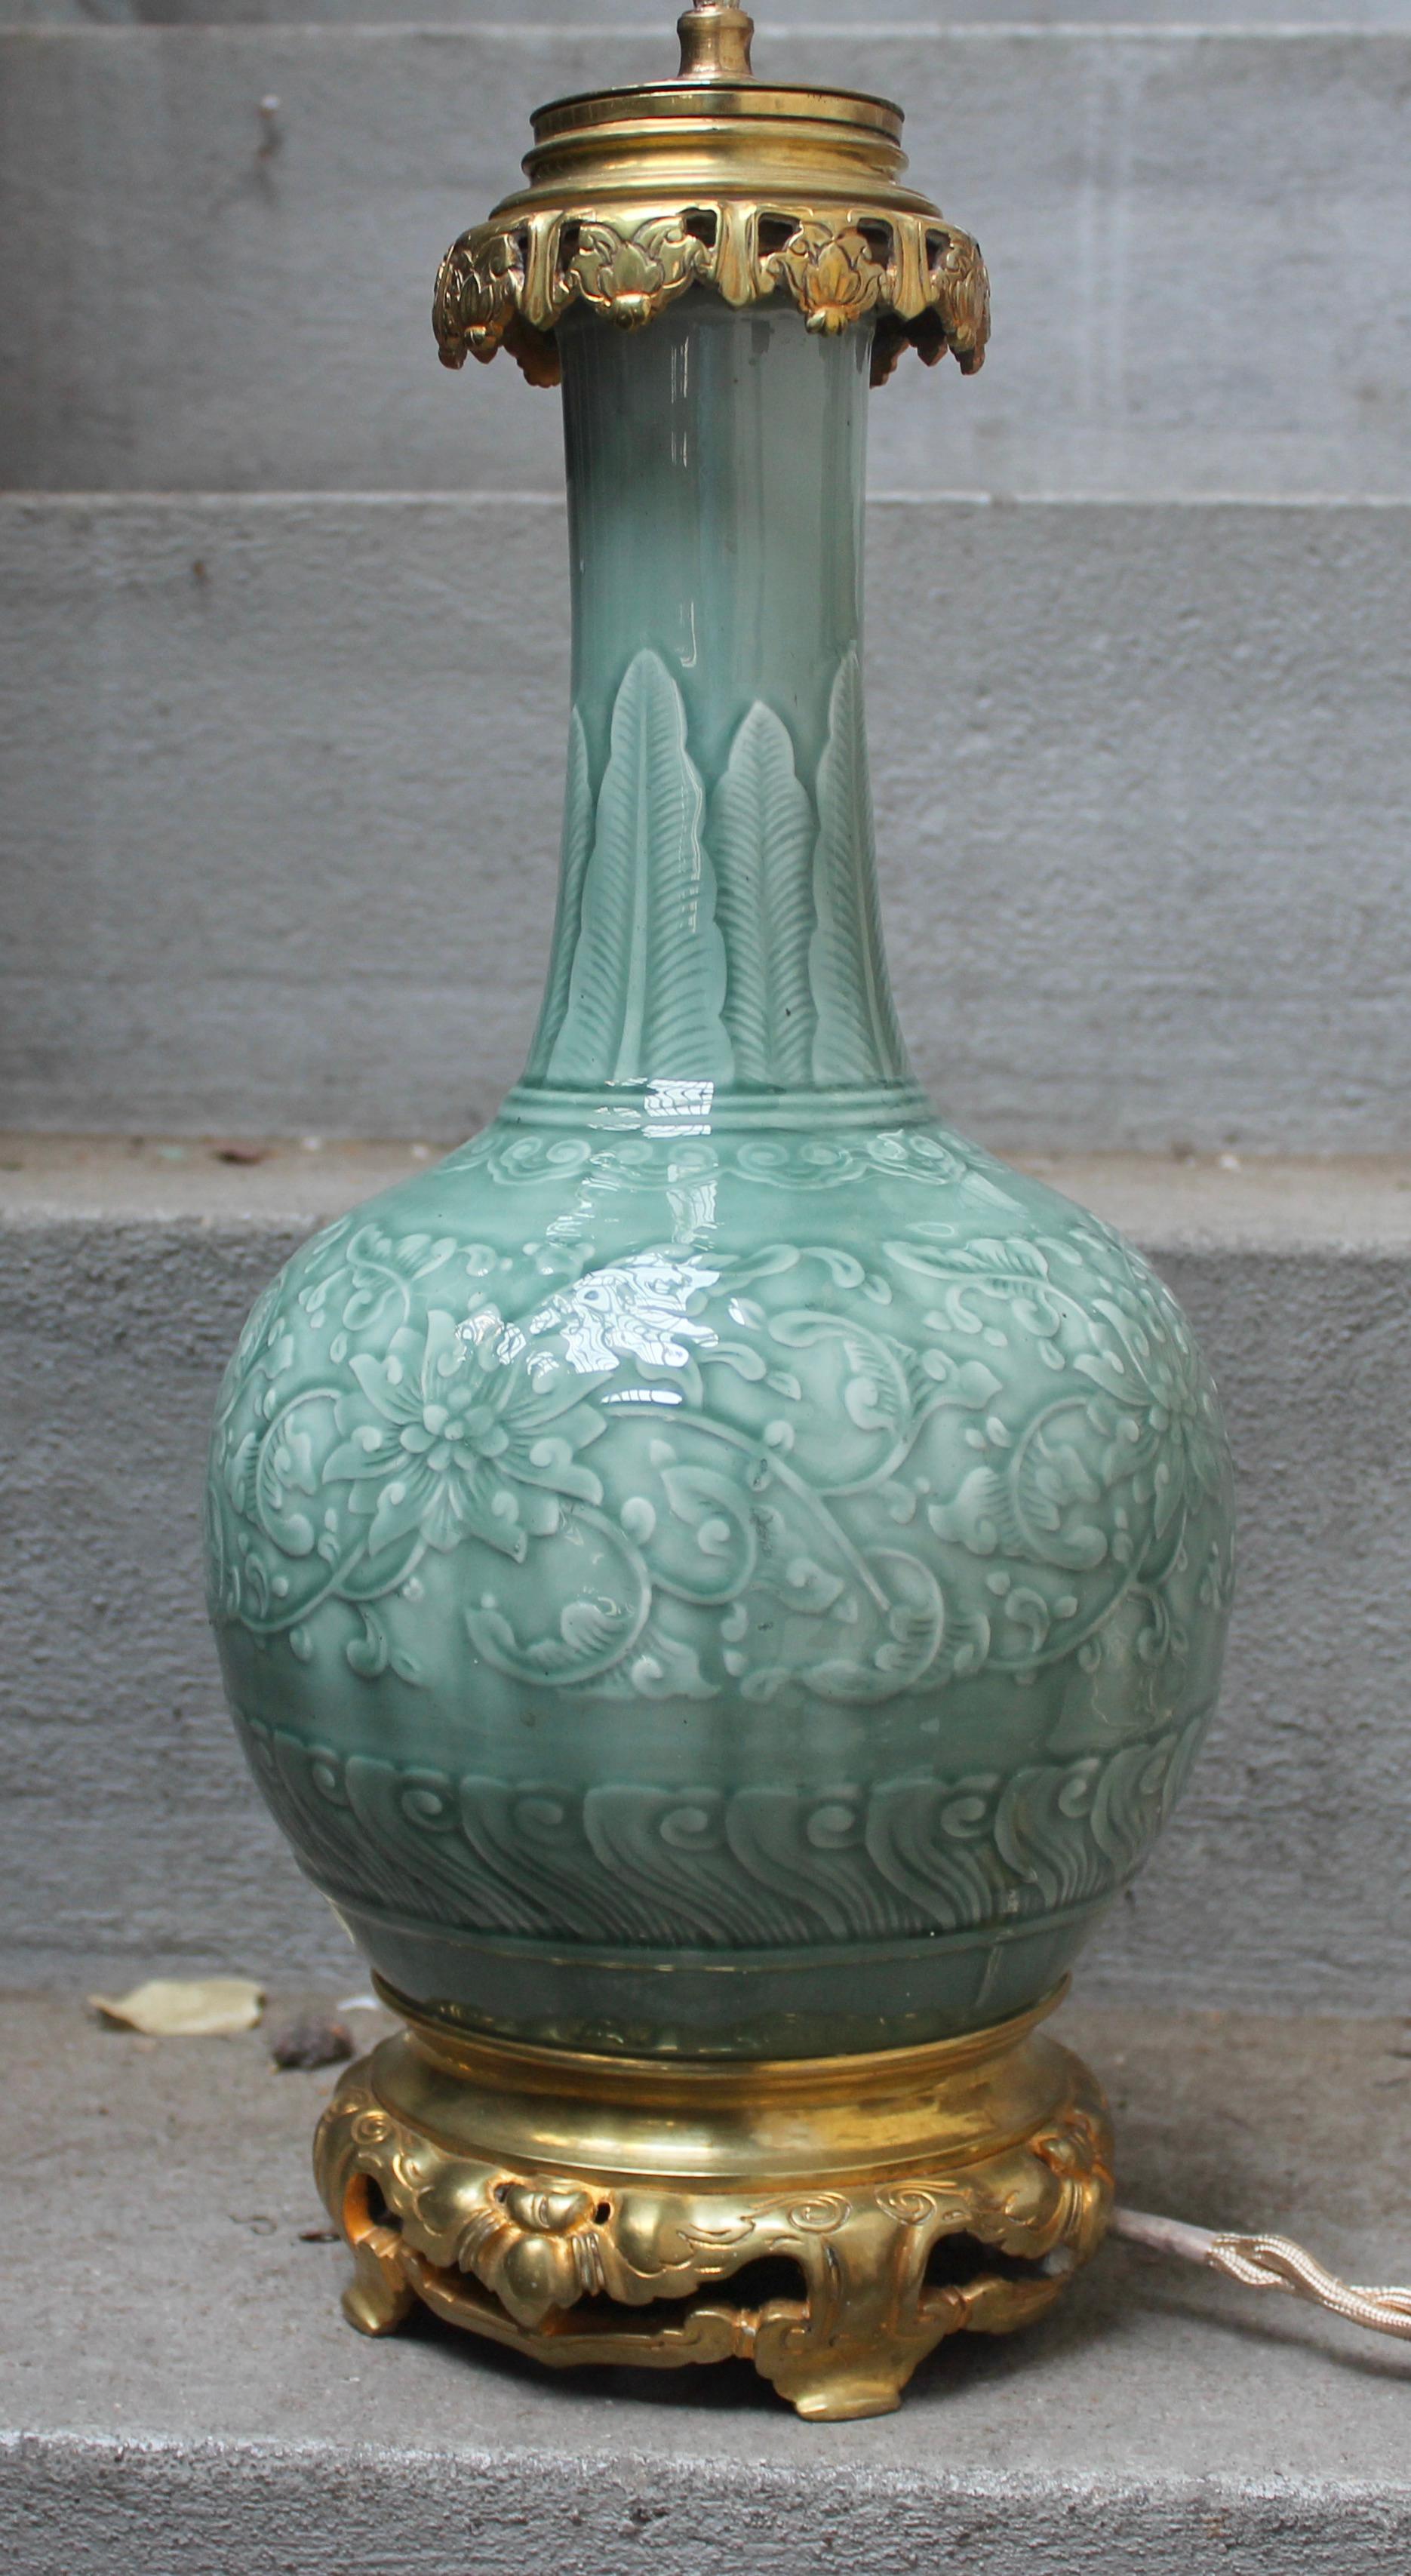 Chinoiserie Theodore Deck Faience Enameled Vase Ormolu-Mounted in Lamp, circa 1880